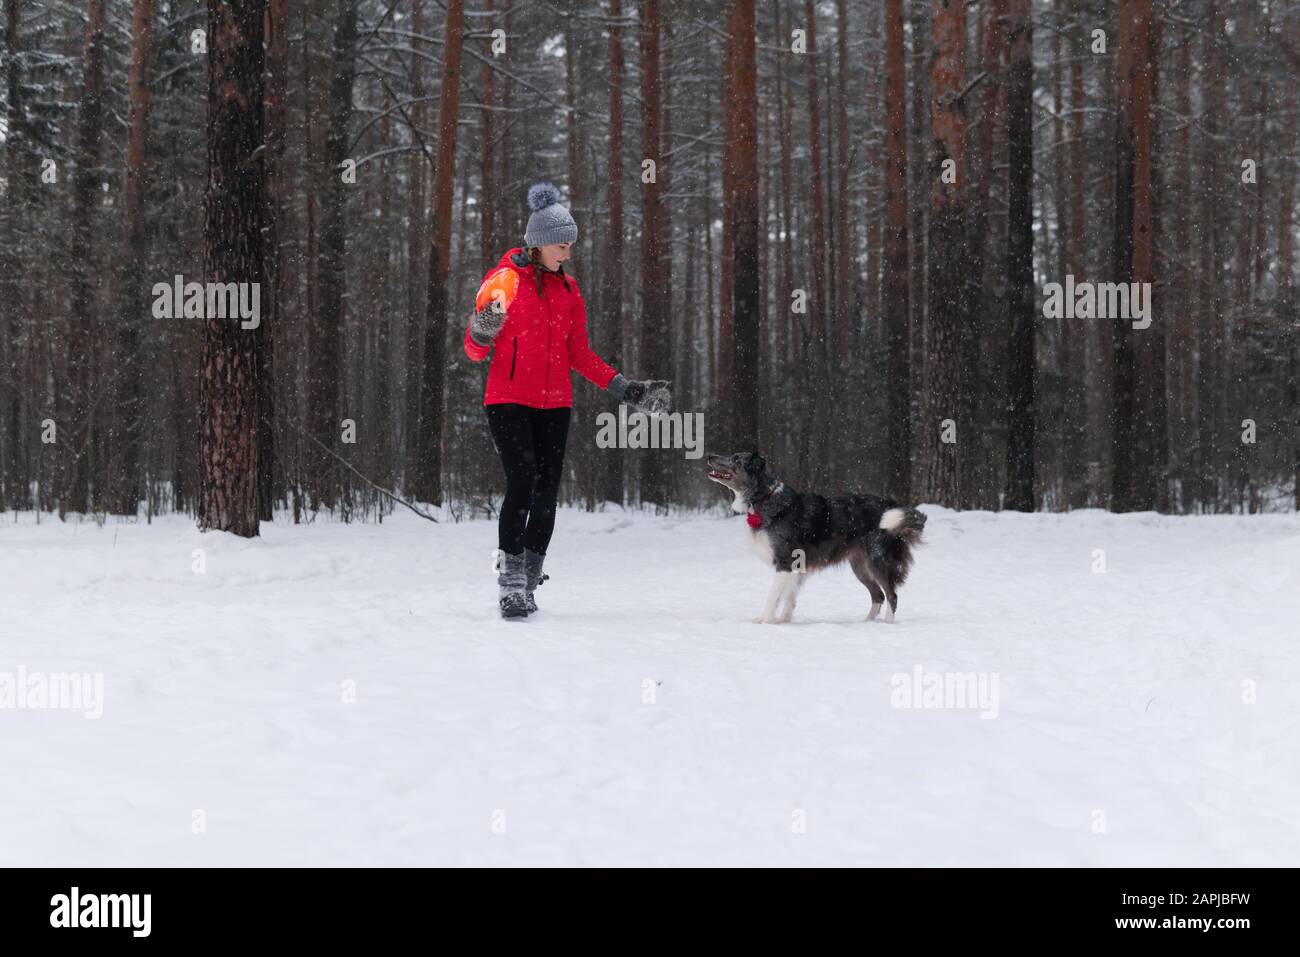 young woman plays frisbee with a dog in a winter forest during a snowfall Stock Photo